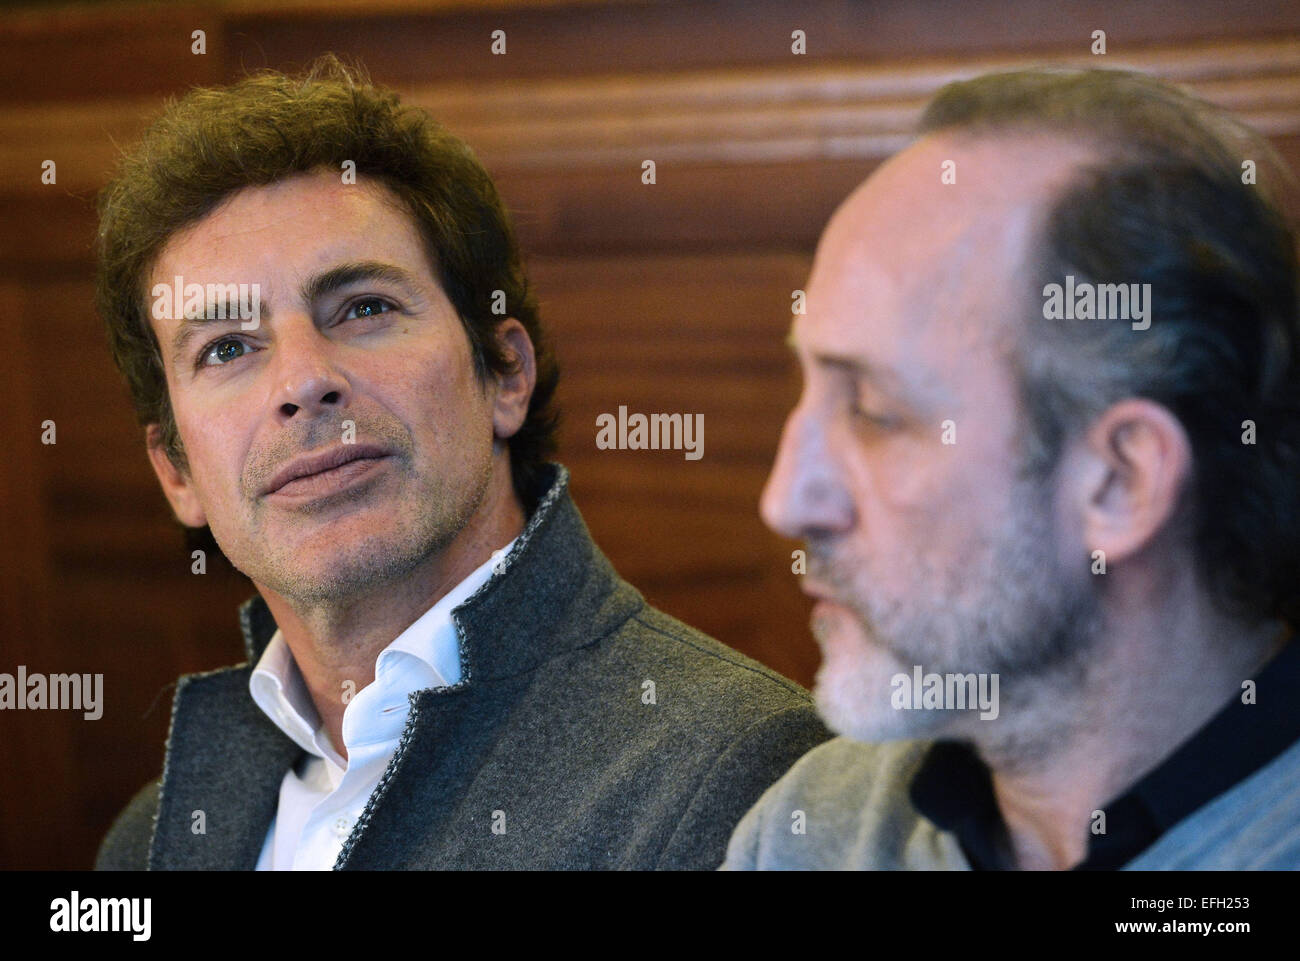 From left: German actor Gedeon Burkhard and actor Karl Markovics pose during the press conference on film about Czechoslovak film star Lida Baarova with director Filip Renc in Prague, Czech Republic, February 3, 2015. The lead role in the prepared Czech film about actress Baarova, who was mistress of Nazi Germany´s Propaganda Minister Joseph Goebbels before the war, will play Slovak actress Tana Pauhofova. Austrian actor Karl Markovics will play Goebbels, while one of the most famous German actors, Gedeon Burkhard, was cast for the role of actor Gustav Froehlich, who was Baarova´s partner both Stock Photo